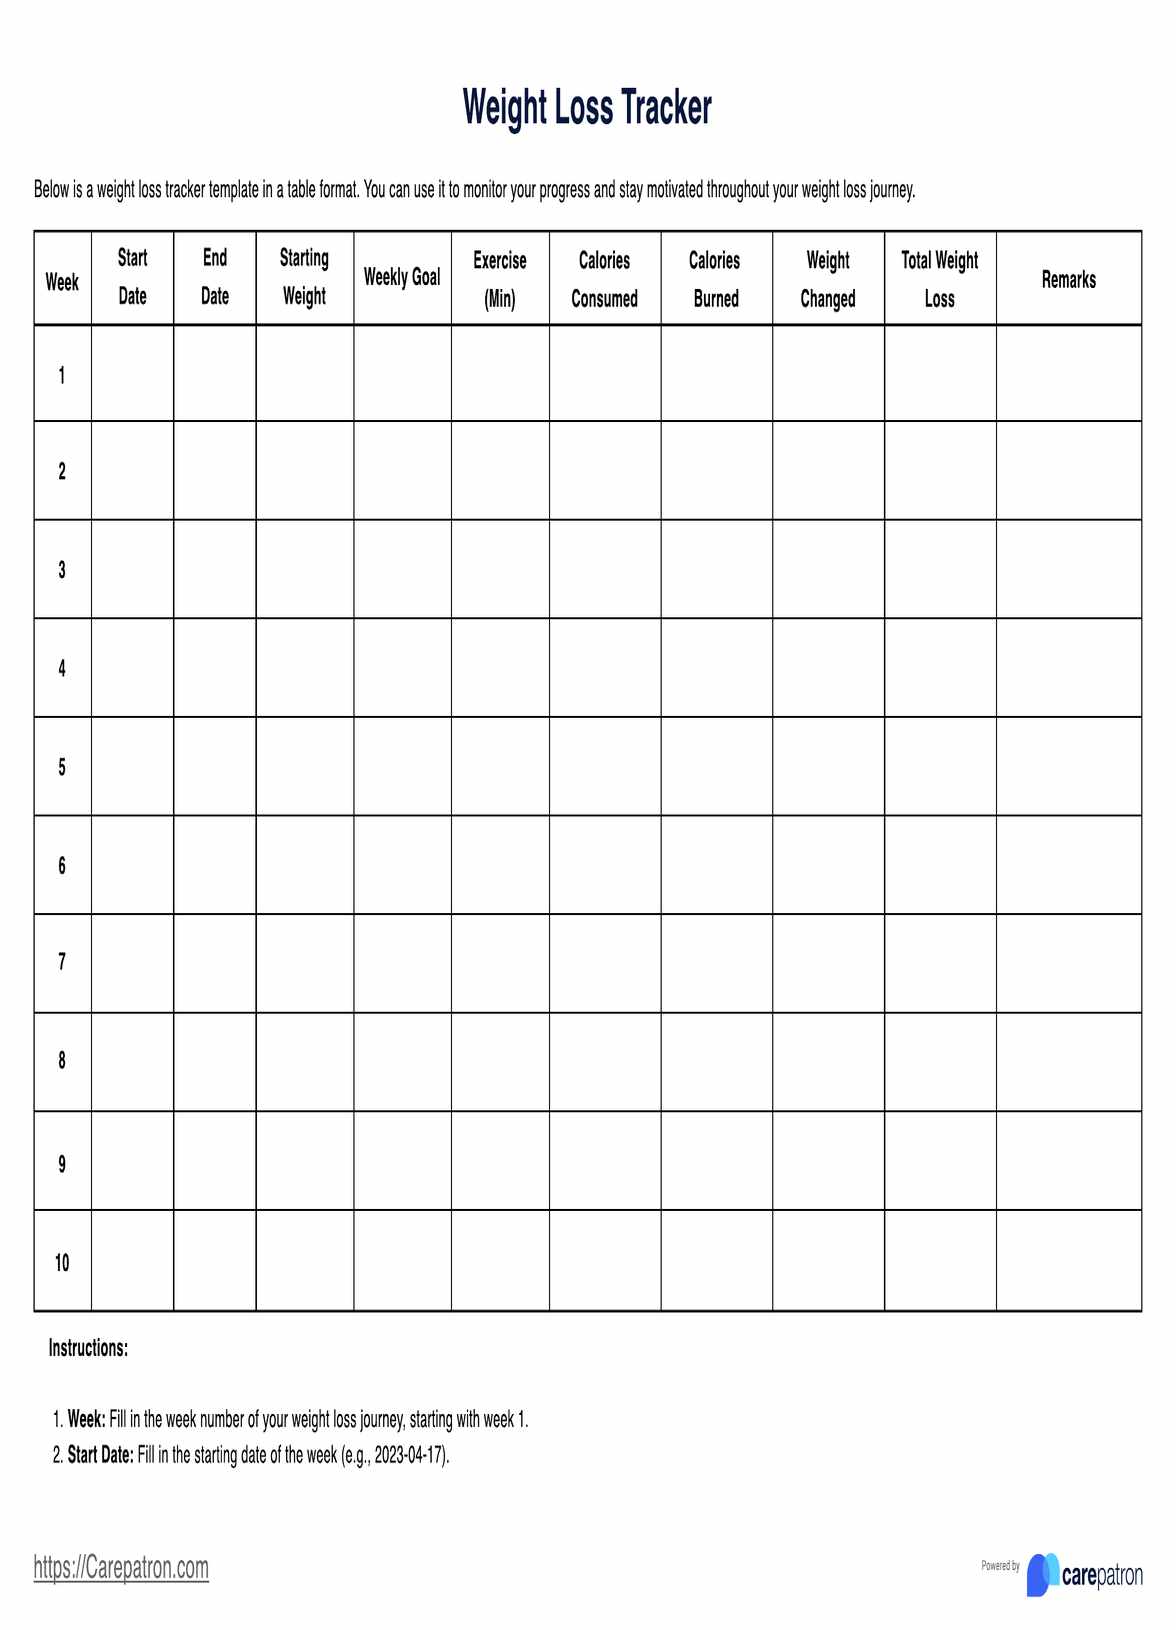 Weight Loss Tracker PDF Example